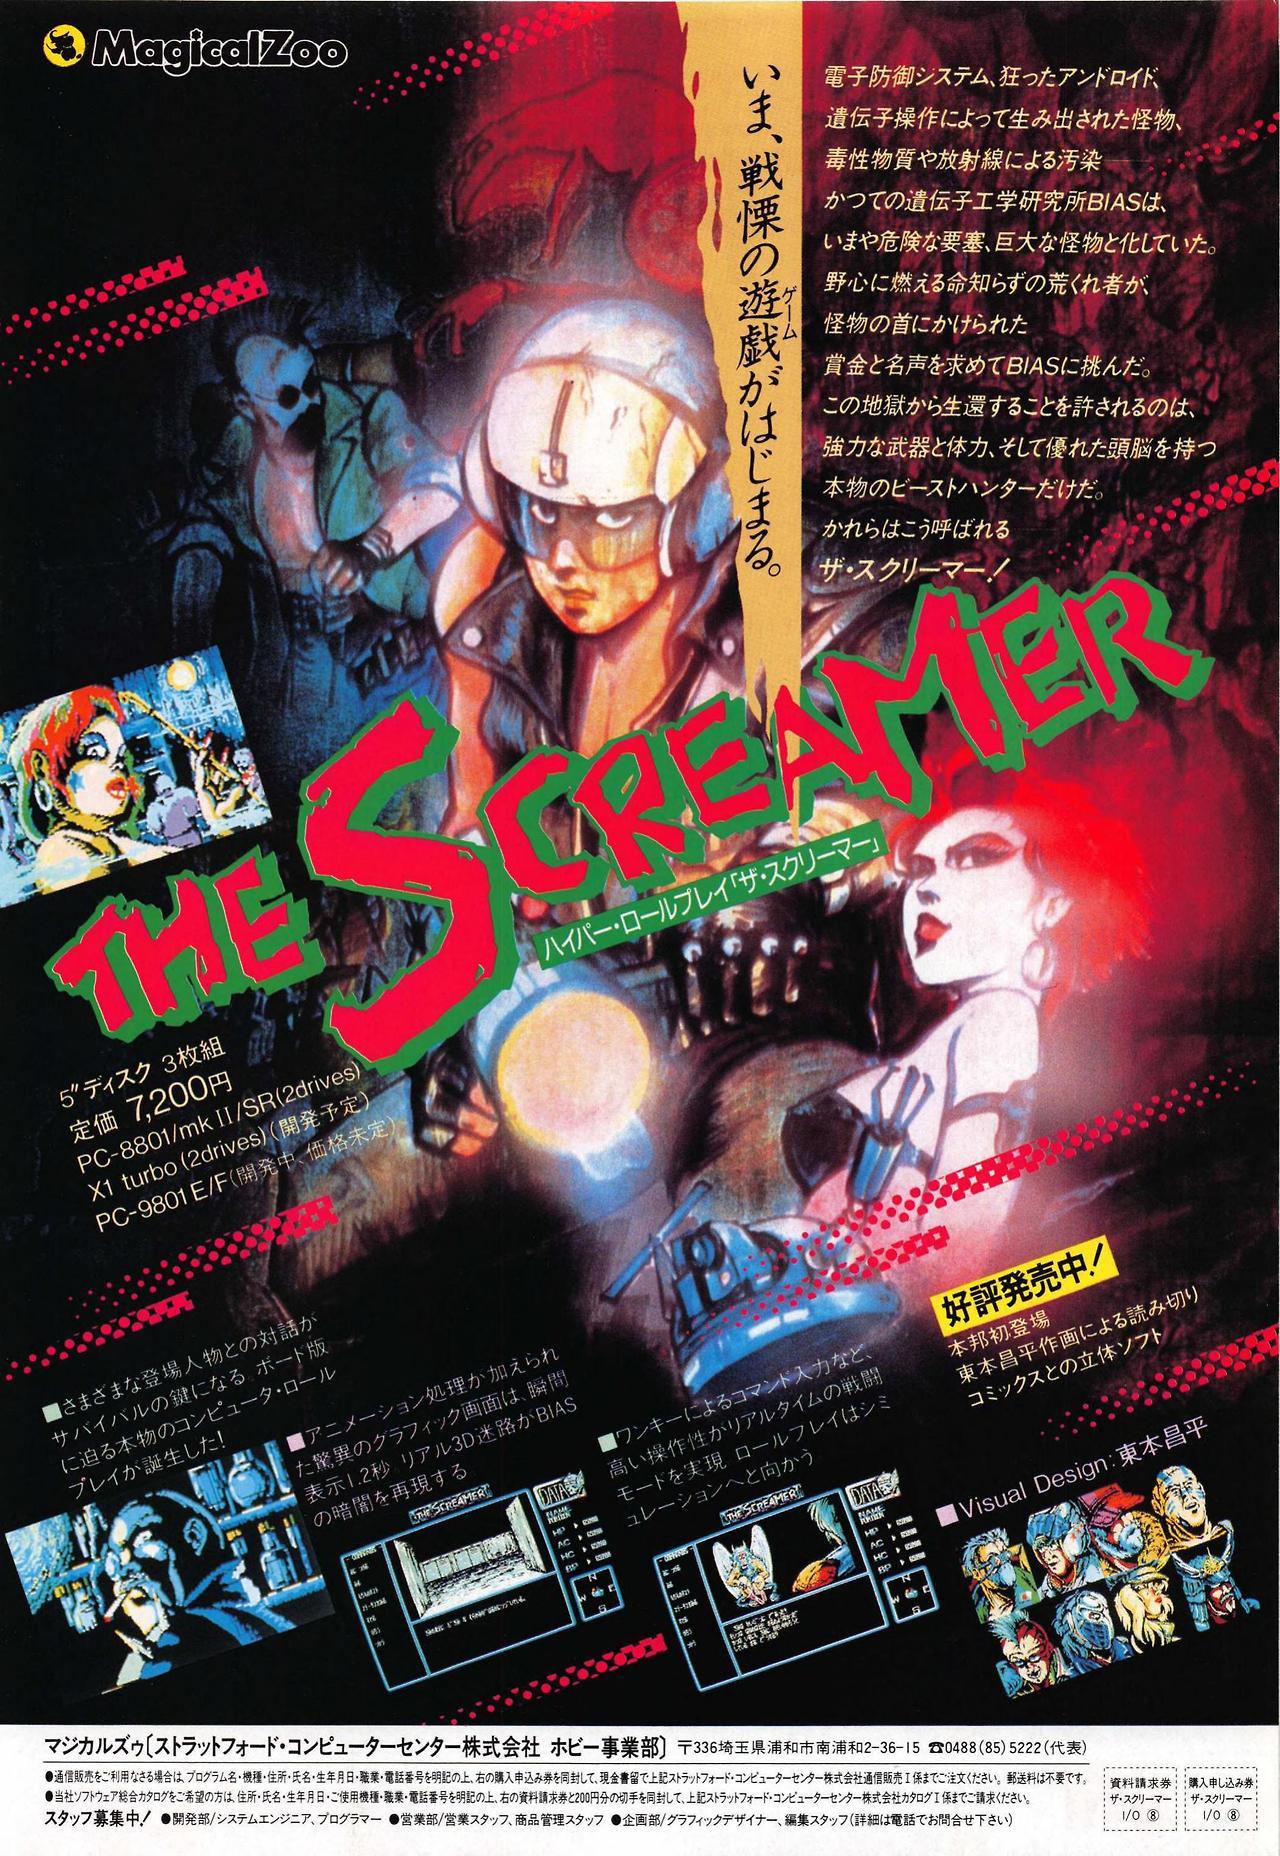 ‘The Screamer’[PC88 / X1 / PC98] [JAPAN] [MAGAZINE] [1985]
• I/O, August 1985
• Scanned/Uploaded by taihen, via The Internet Archive